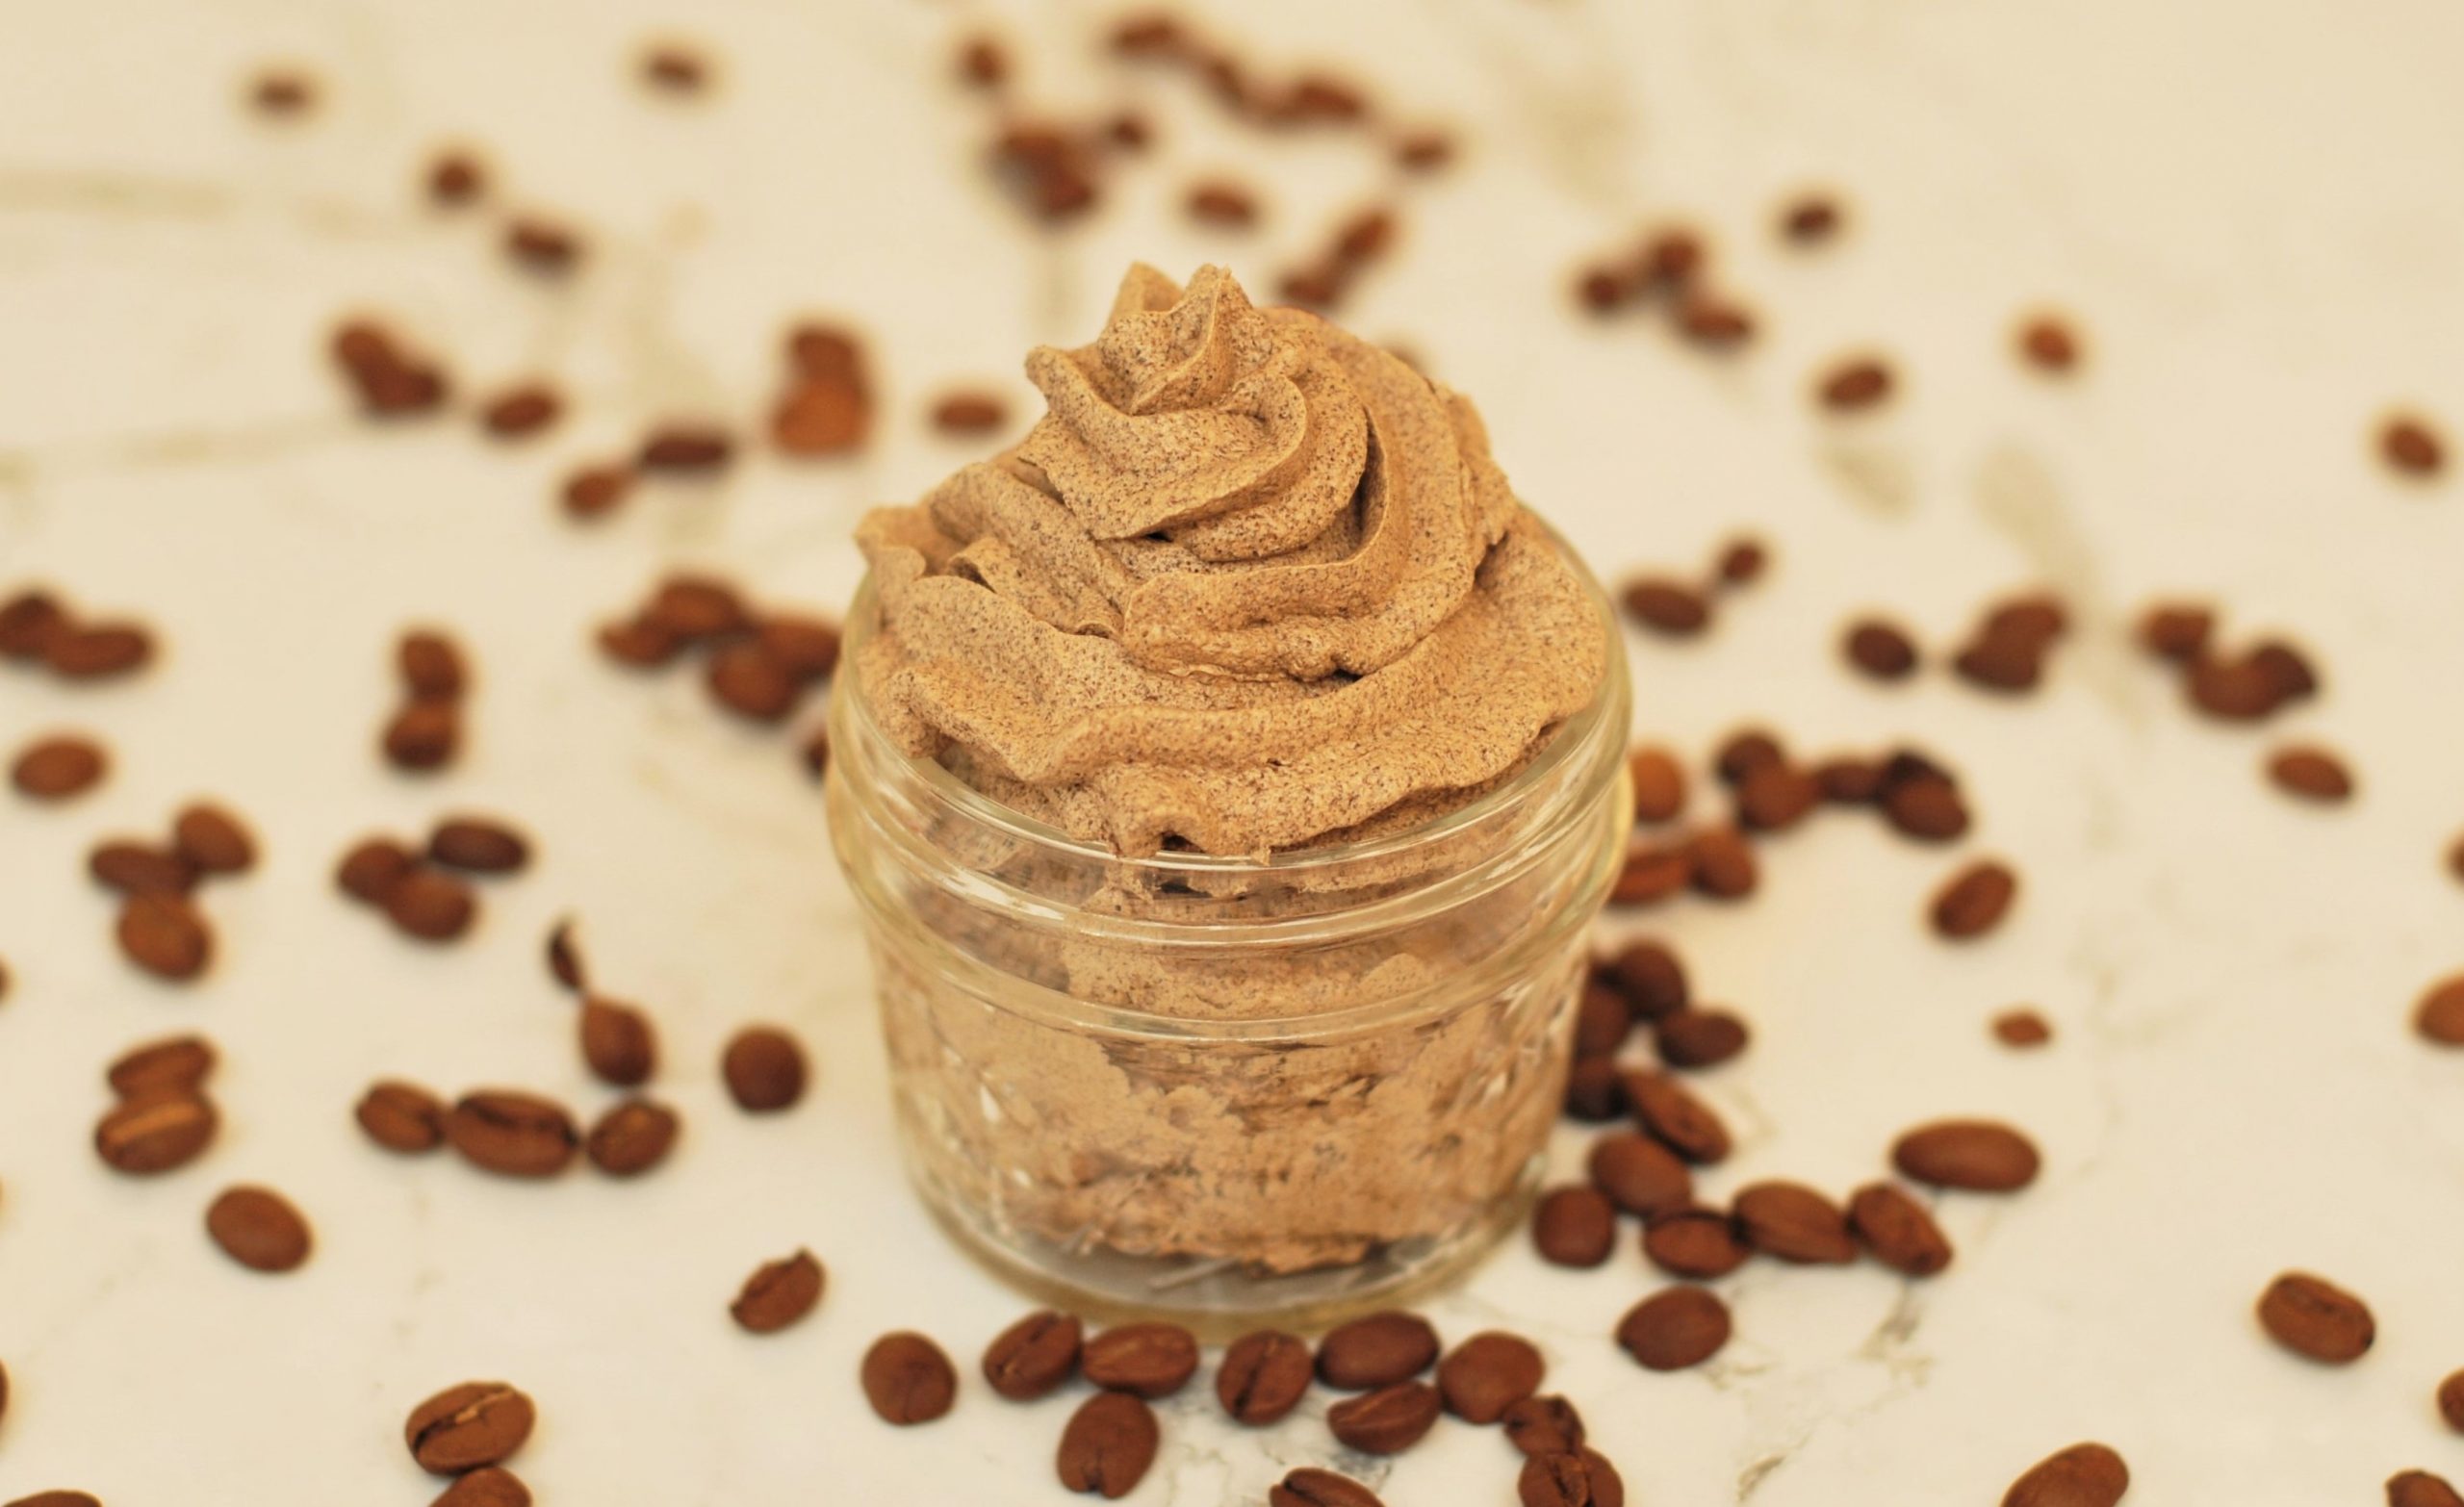 Whipped Coffee Scrub Recipe For Gentle Exfoliation